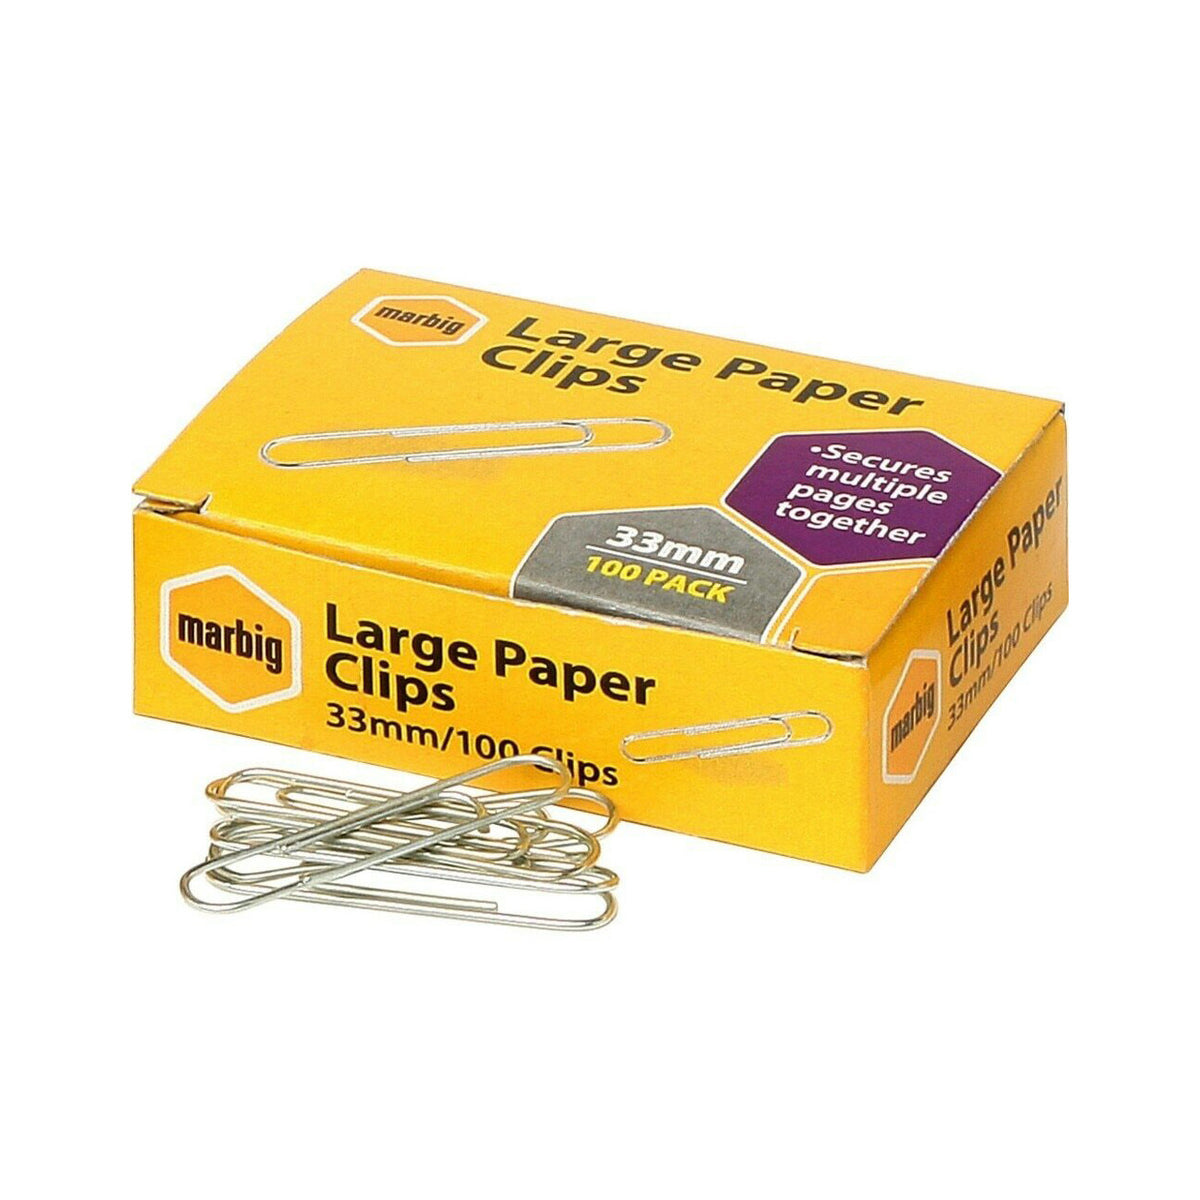 PAPER CLIPS - LARGE (33MM) - BOX OF 100 CHROME